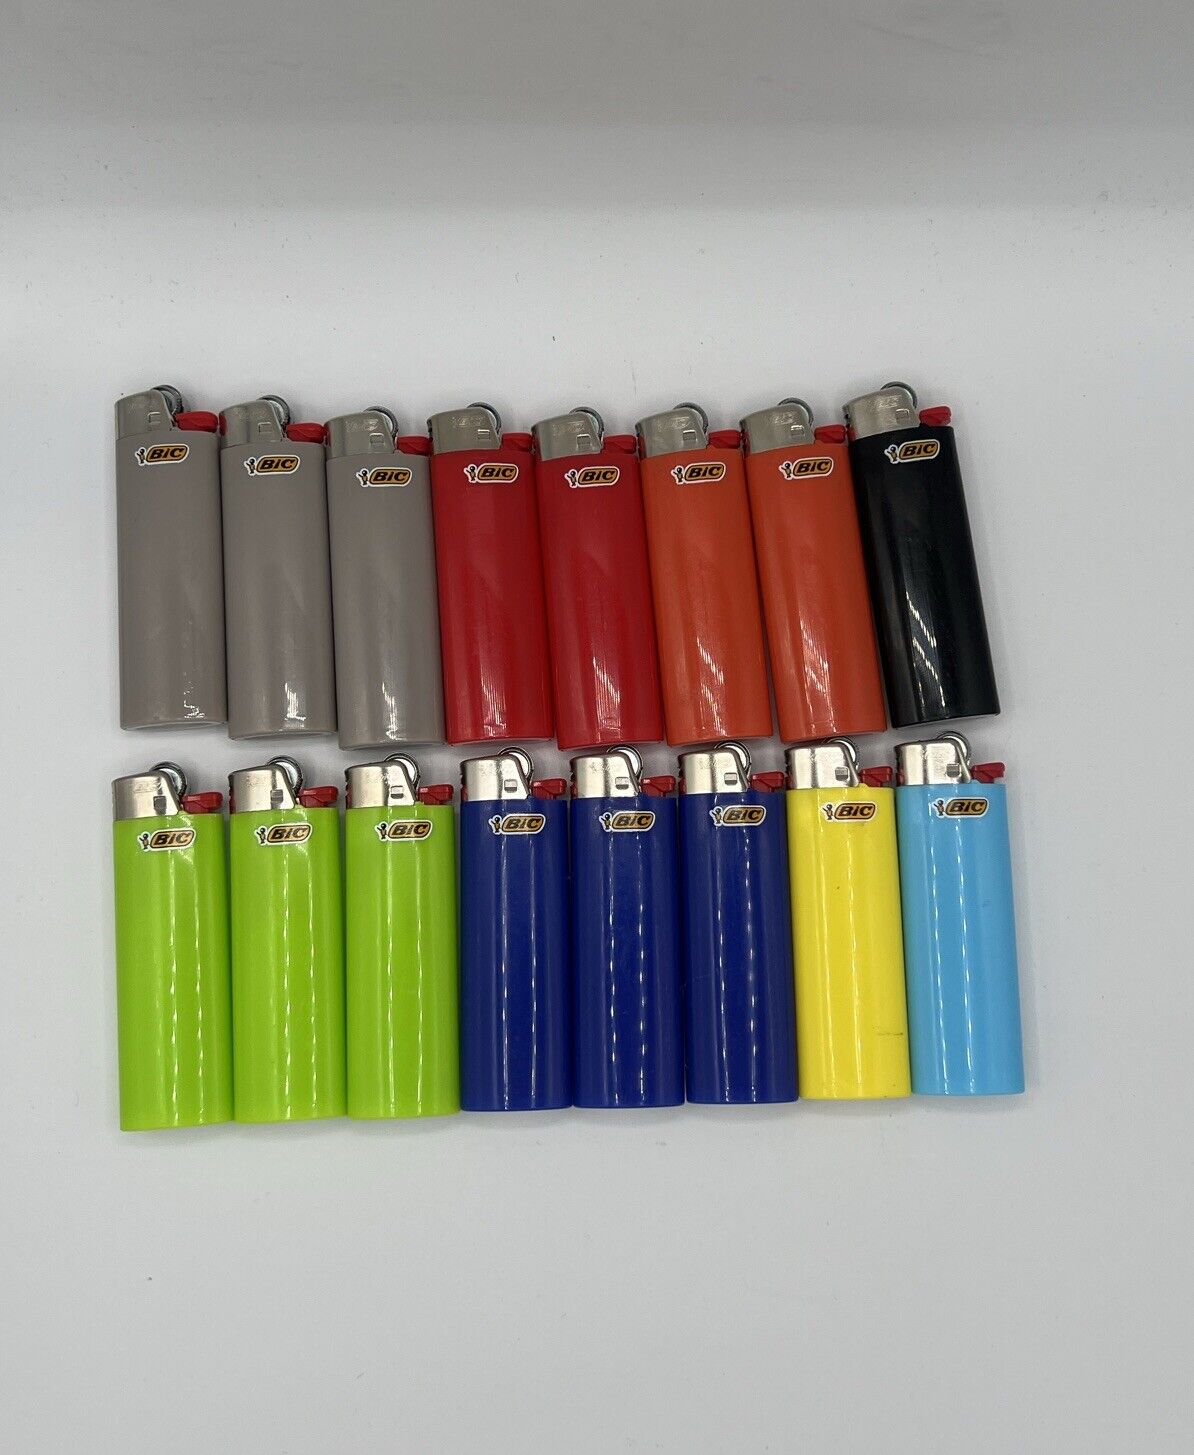 BIC Classic Full Size Pocket Lighter Assorted Colors Lot of 16 New